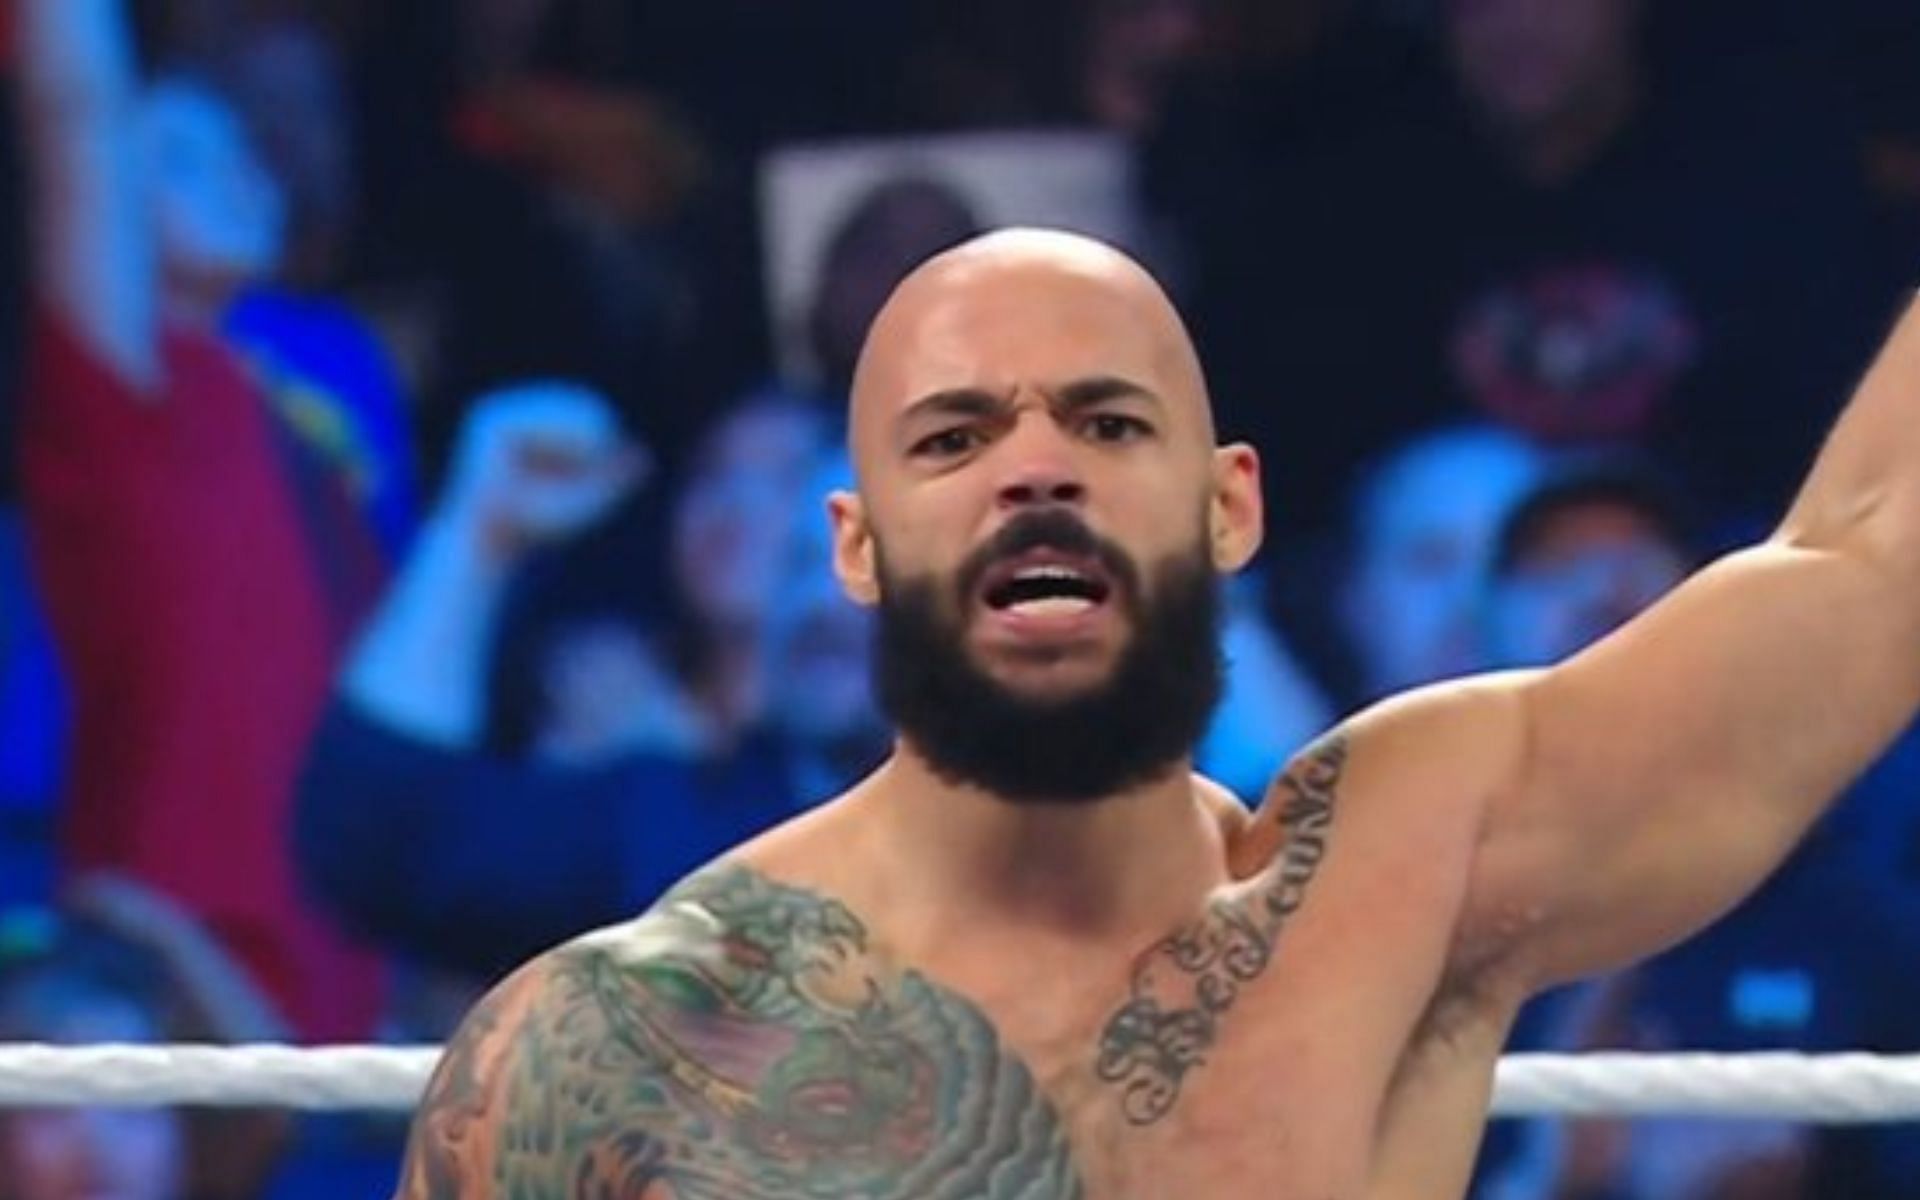 Ricochet is heading to the 2023 Royal Rumble